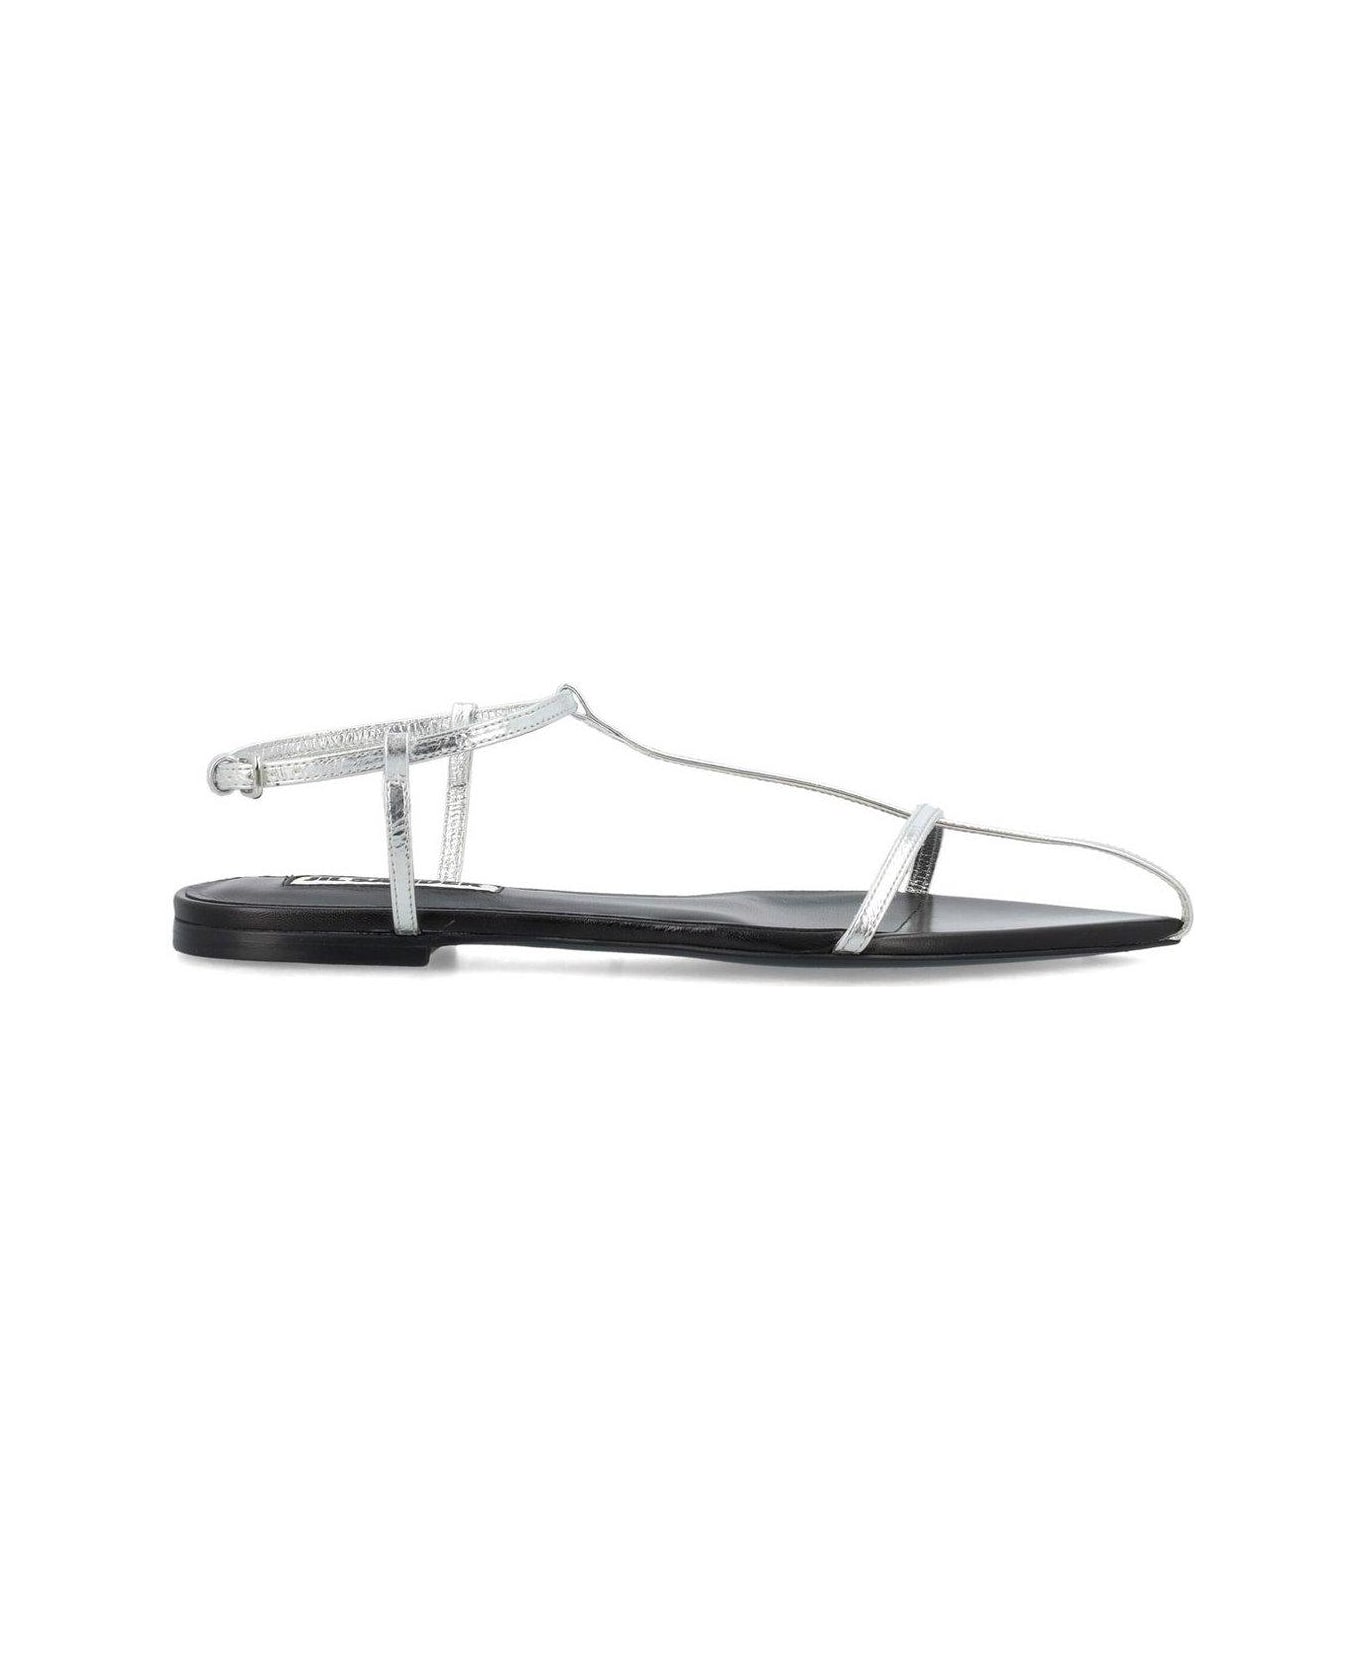 Jil Sander Pointed-toe Caged Sandals - Silver サンダル